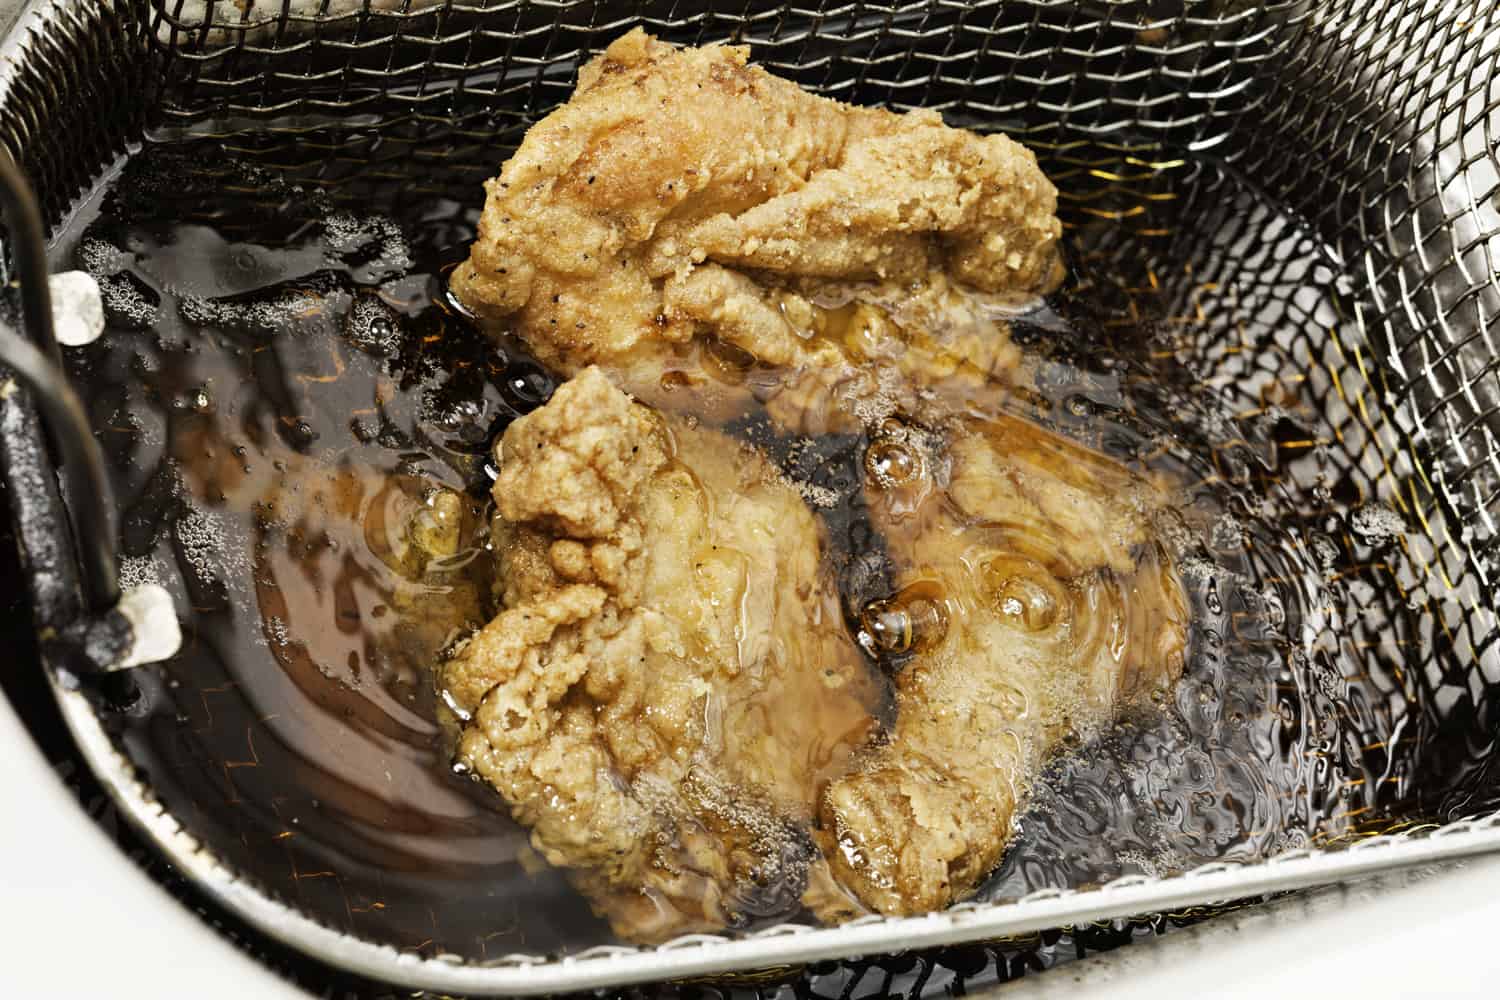 Pieces of breaded chicken frying in hot oil. They are held by a wire mesh basket. Focus on the oil and upper piece.